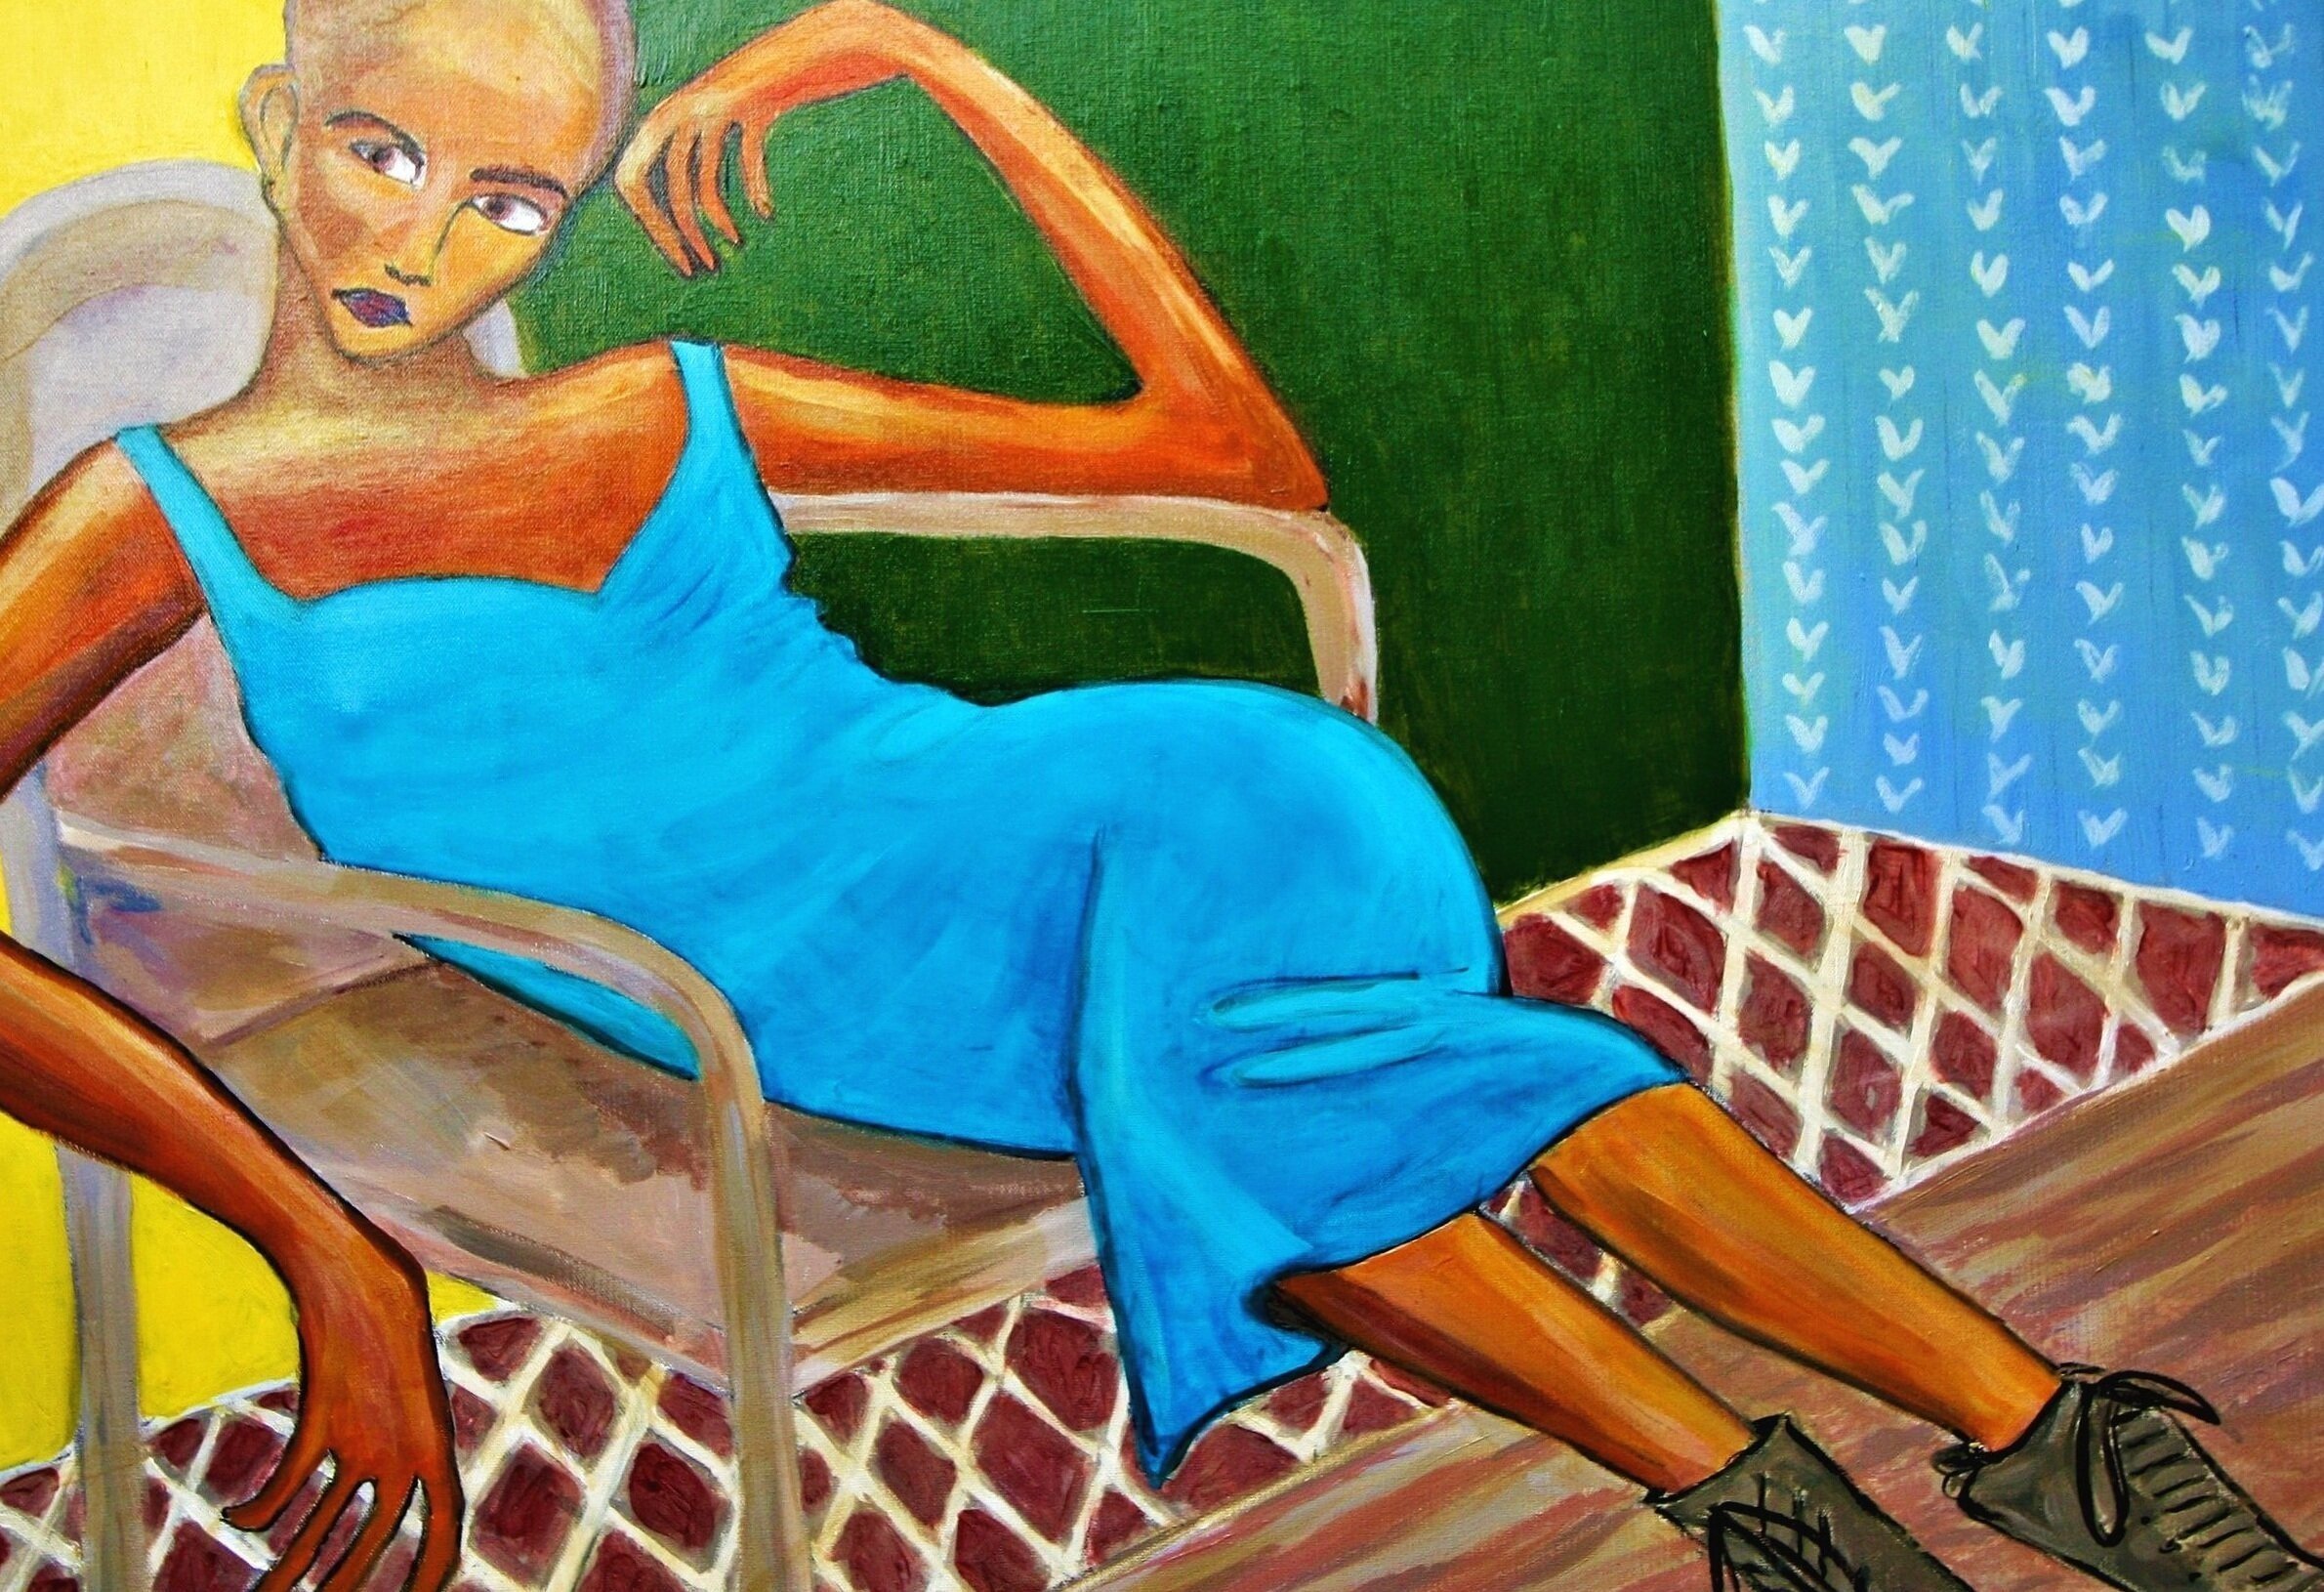 "Woman in a Blue Dress" by Susana Youngsteadt